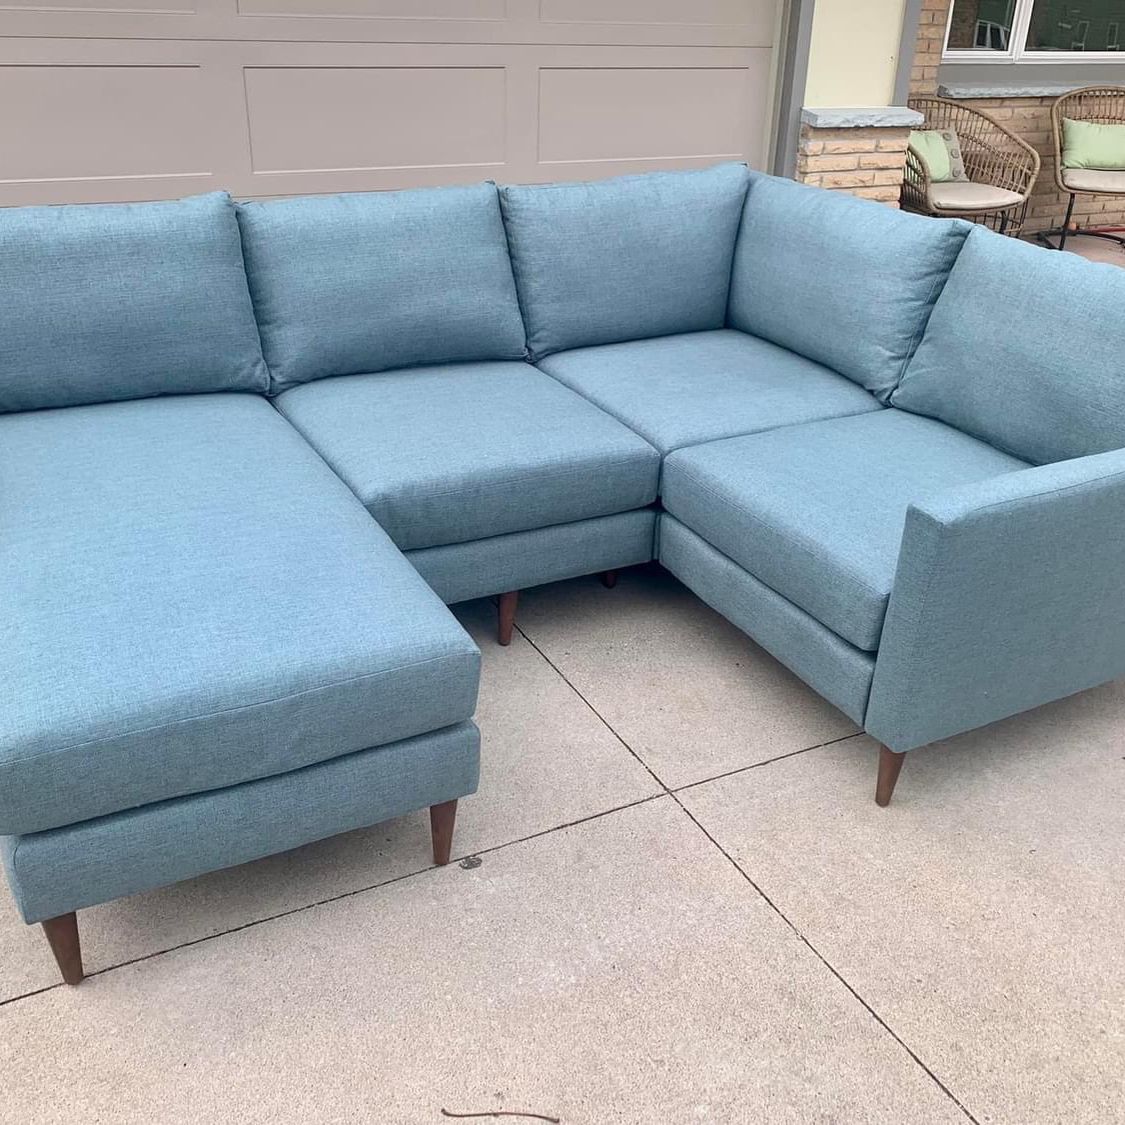 All form Four Seat Sectional With Chaise